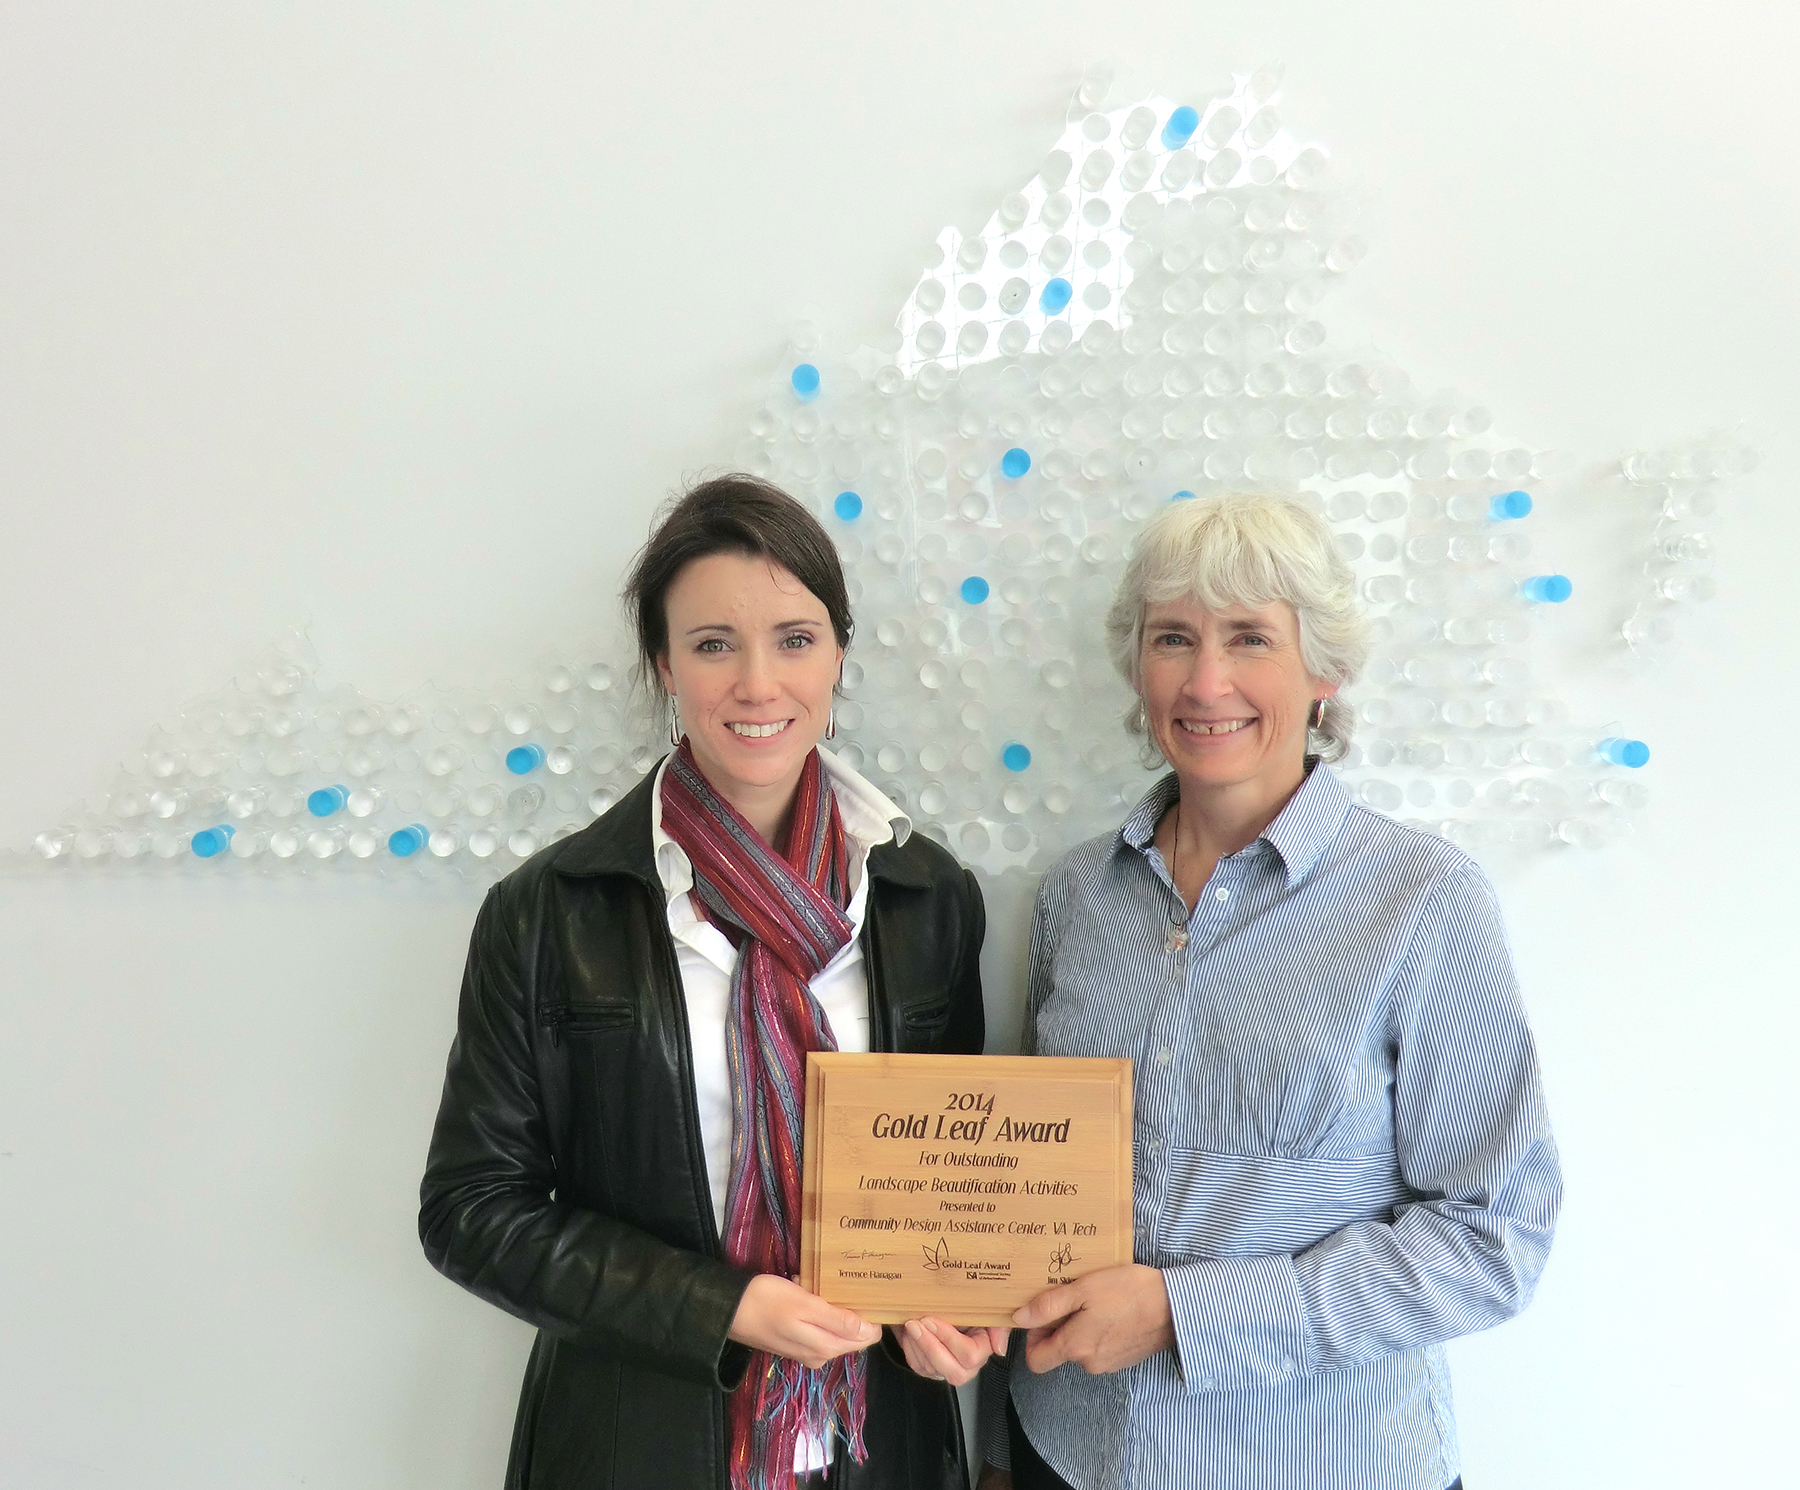 Lara Browning and Elizabeth Gilboy hold the wooden plaque they received for the Gold Leaf Award.